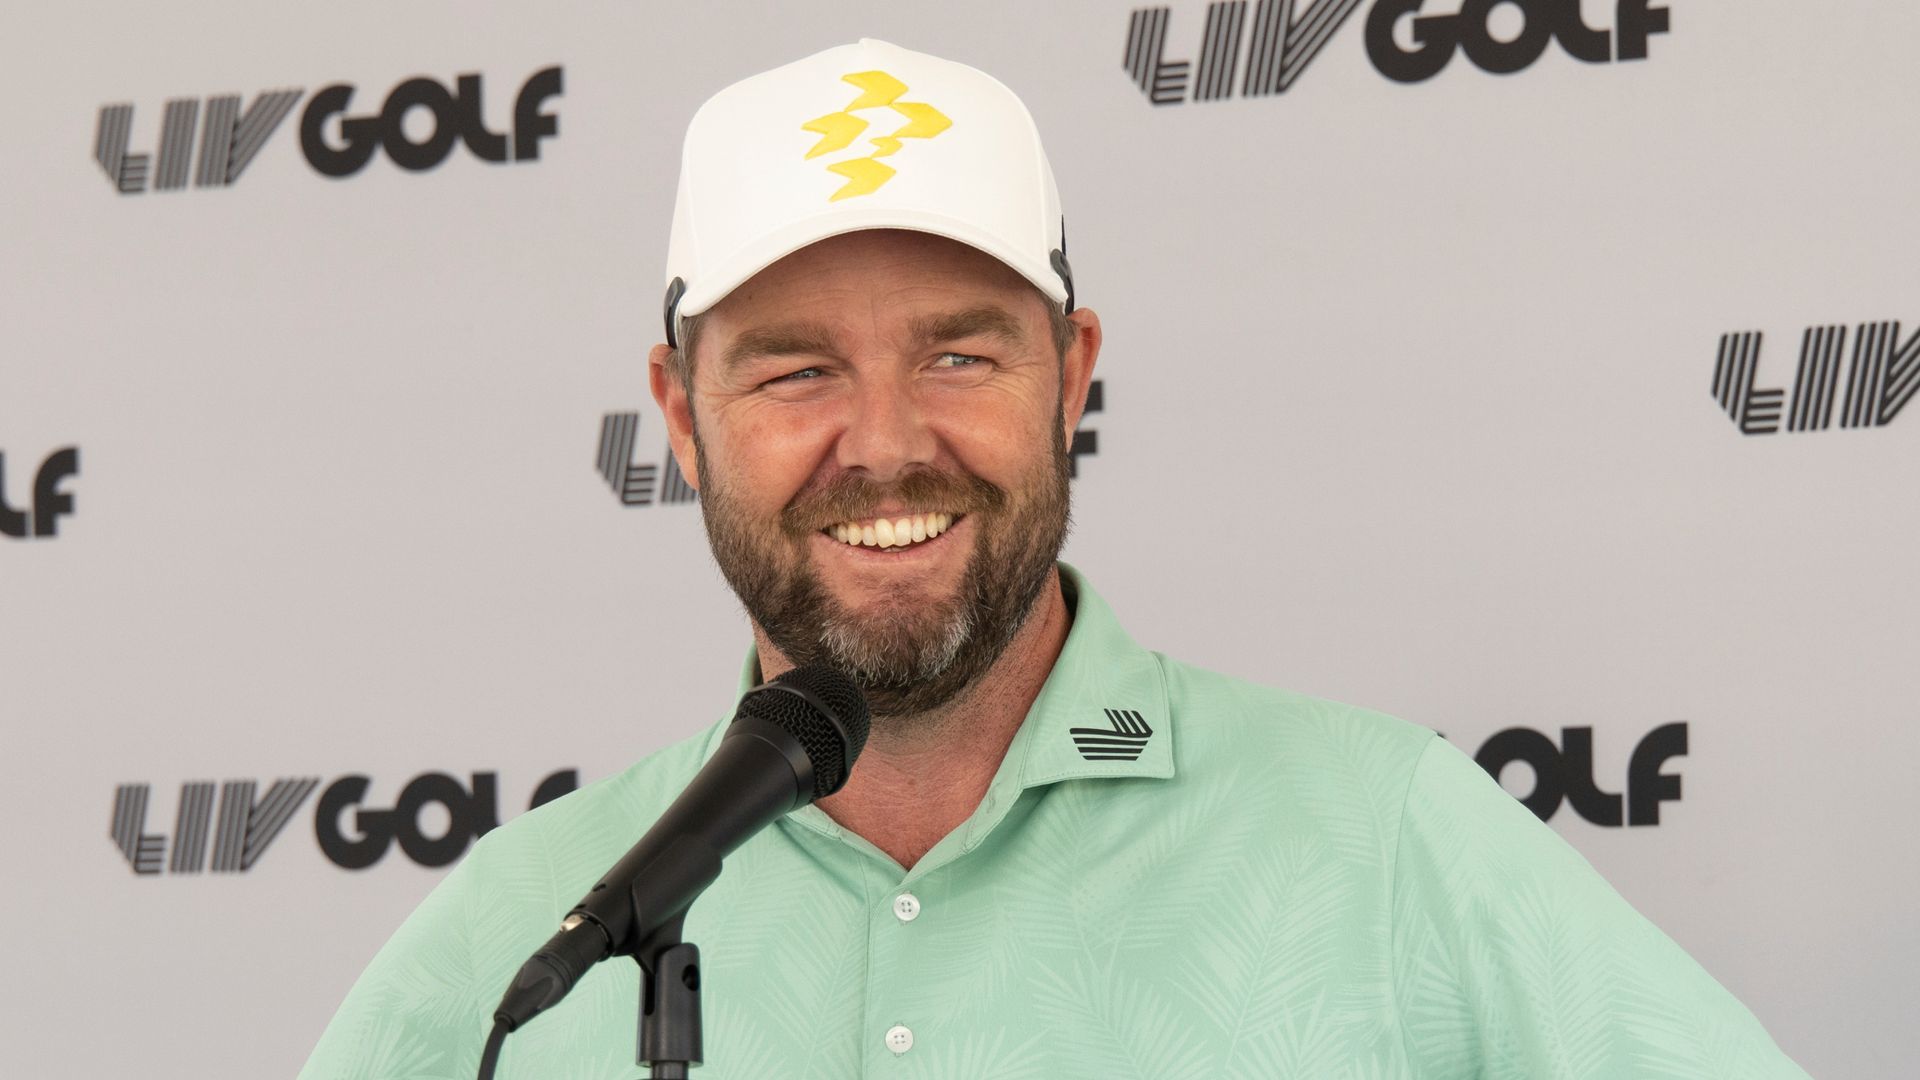 Leishman leads after first round at LIV Golf Tucson